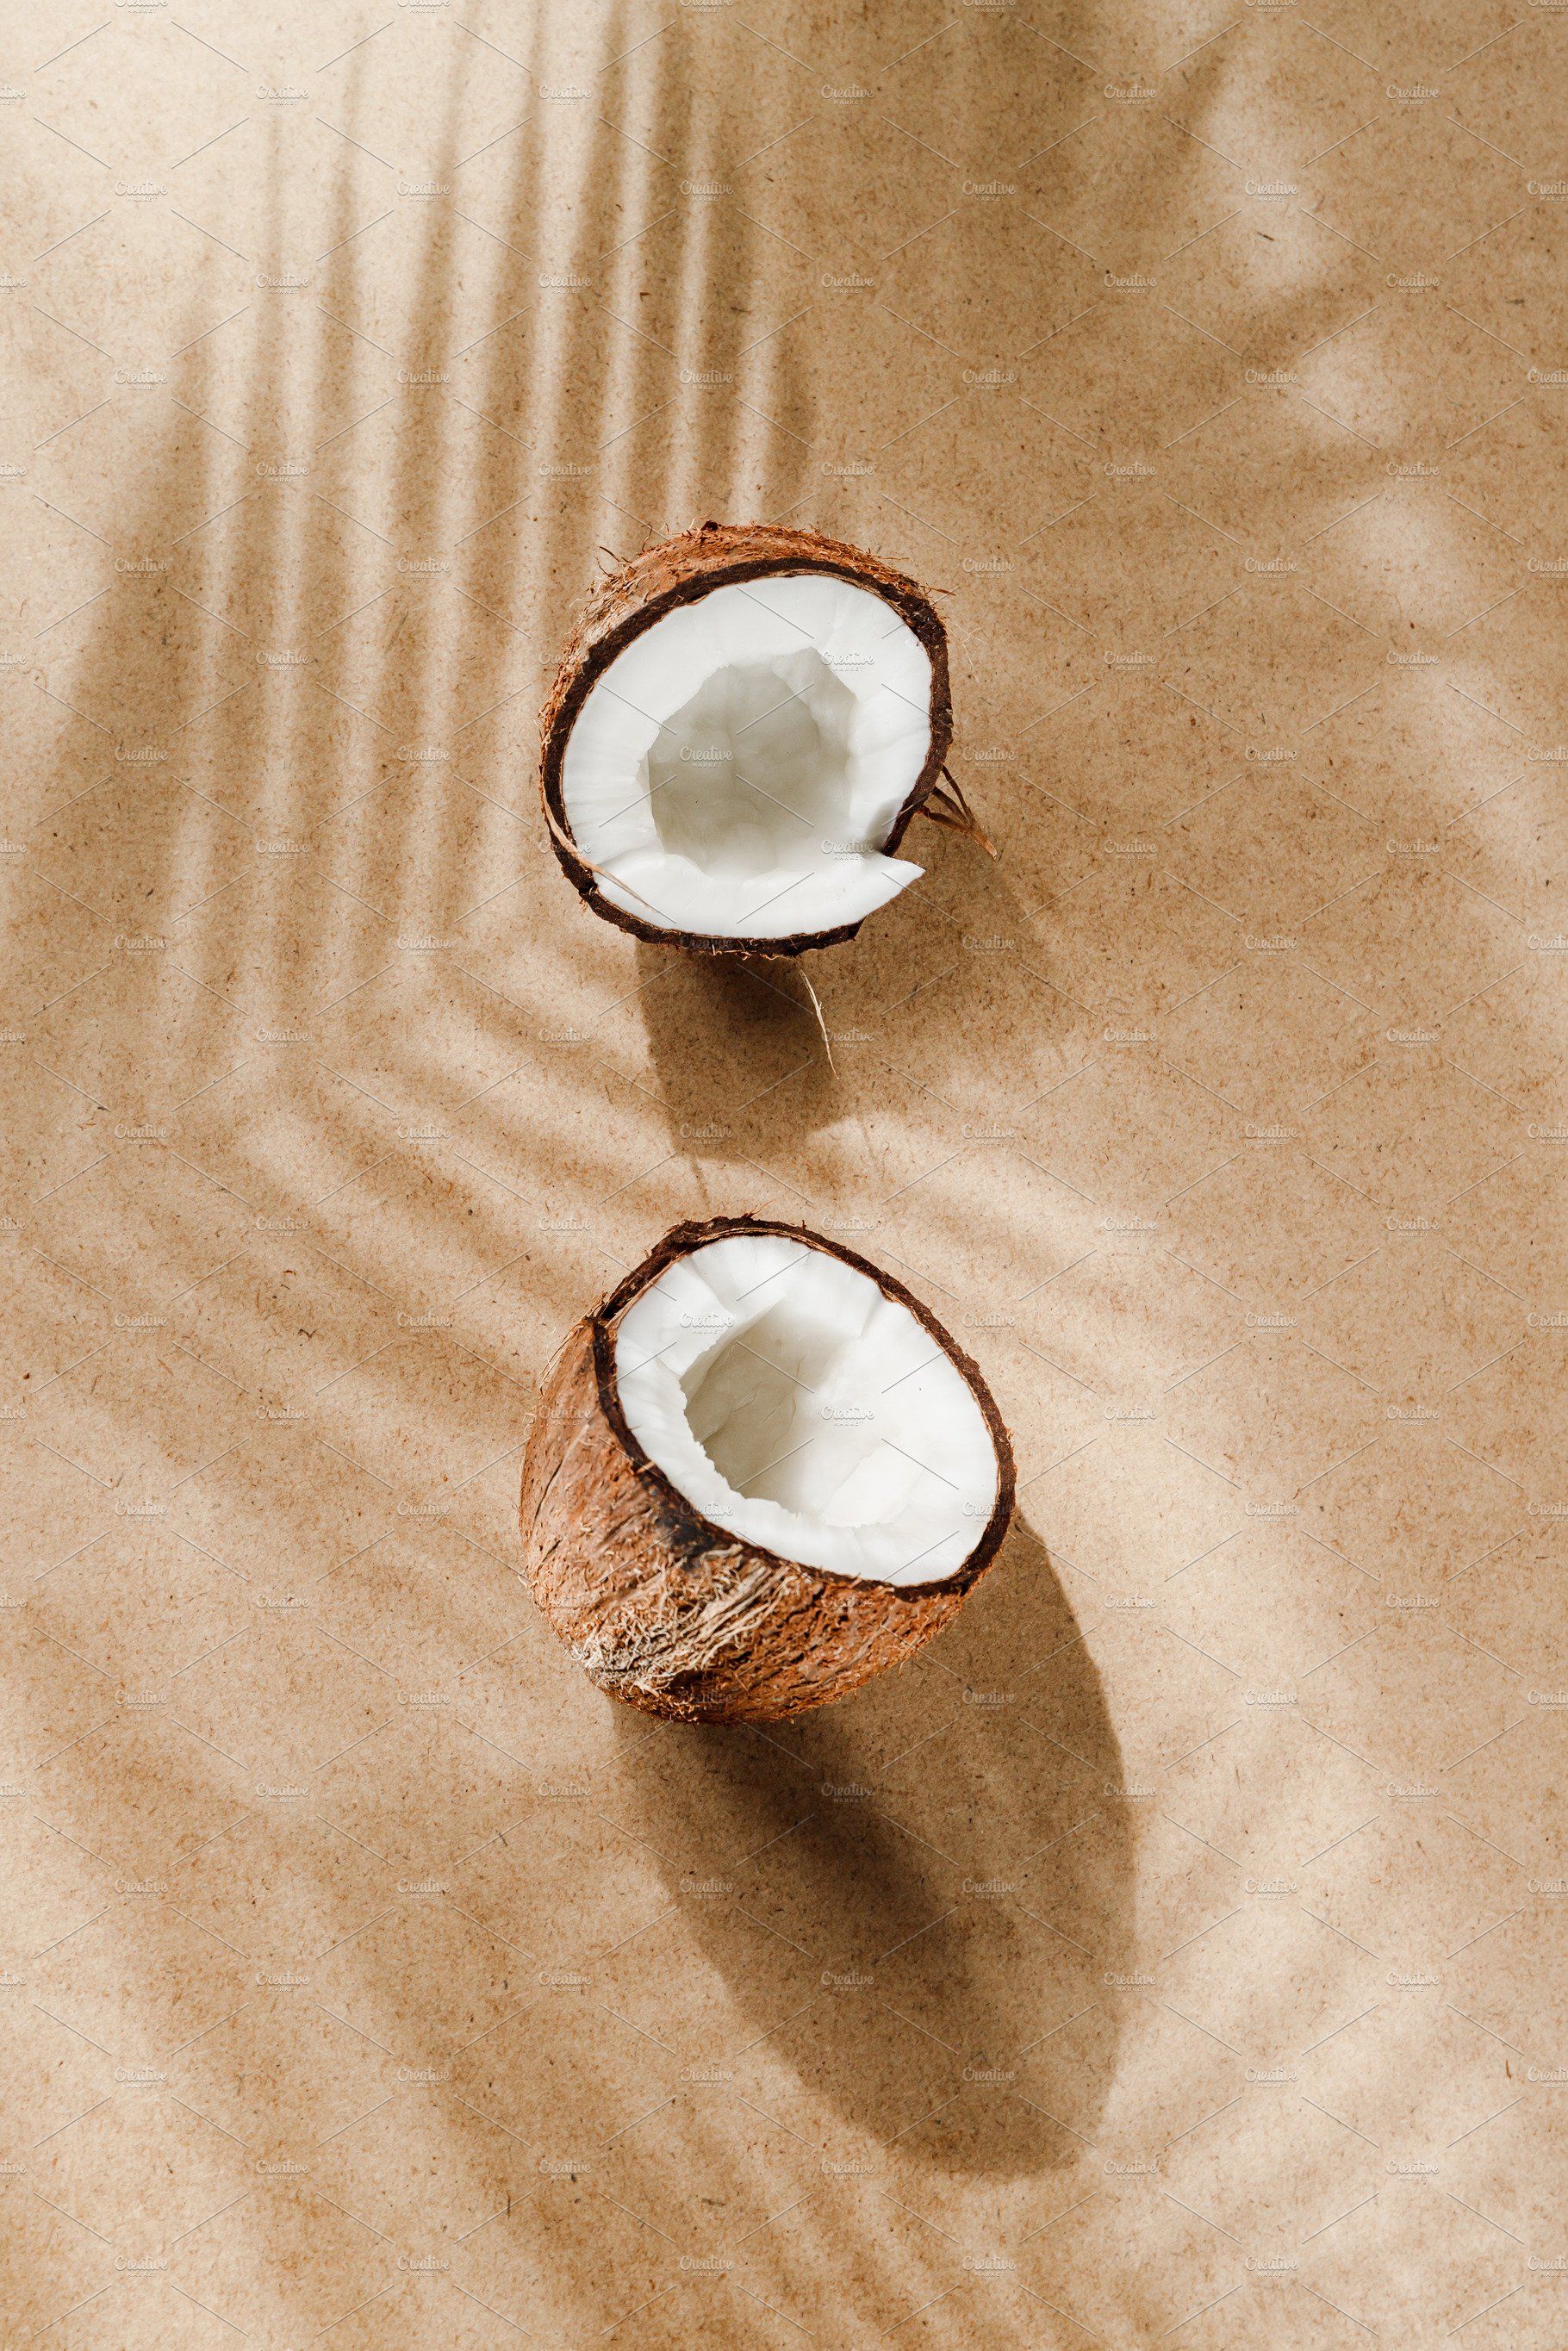 A coconut and some leaves on the ground - Coconut